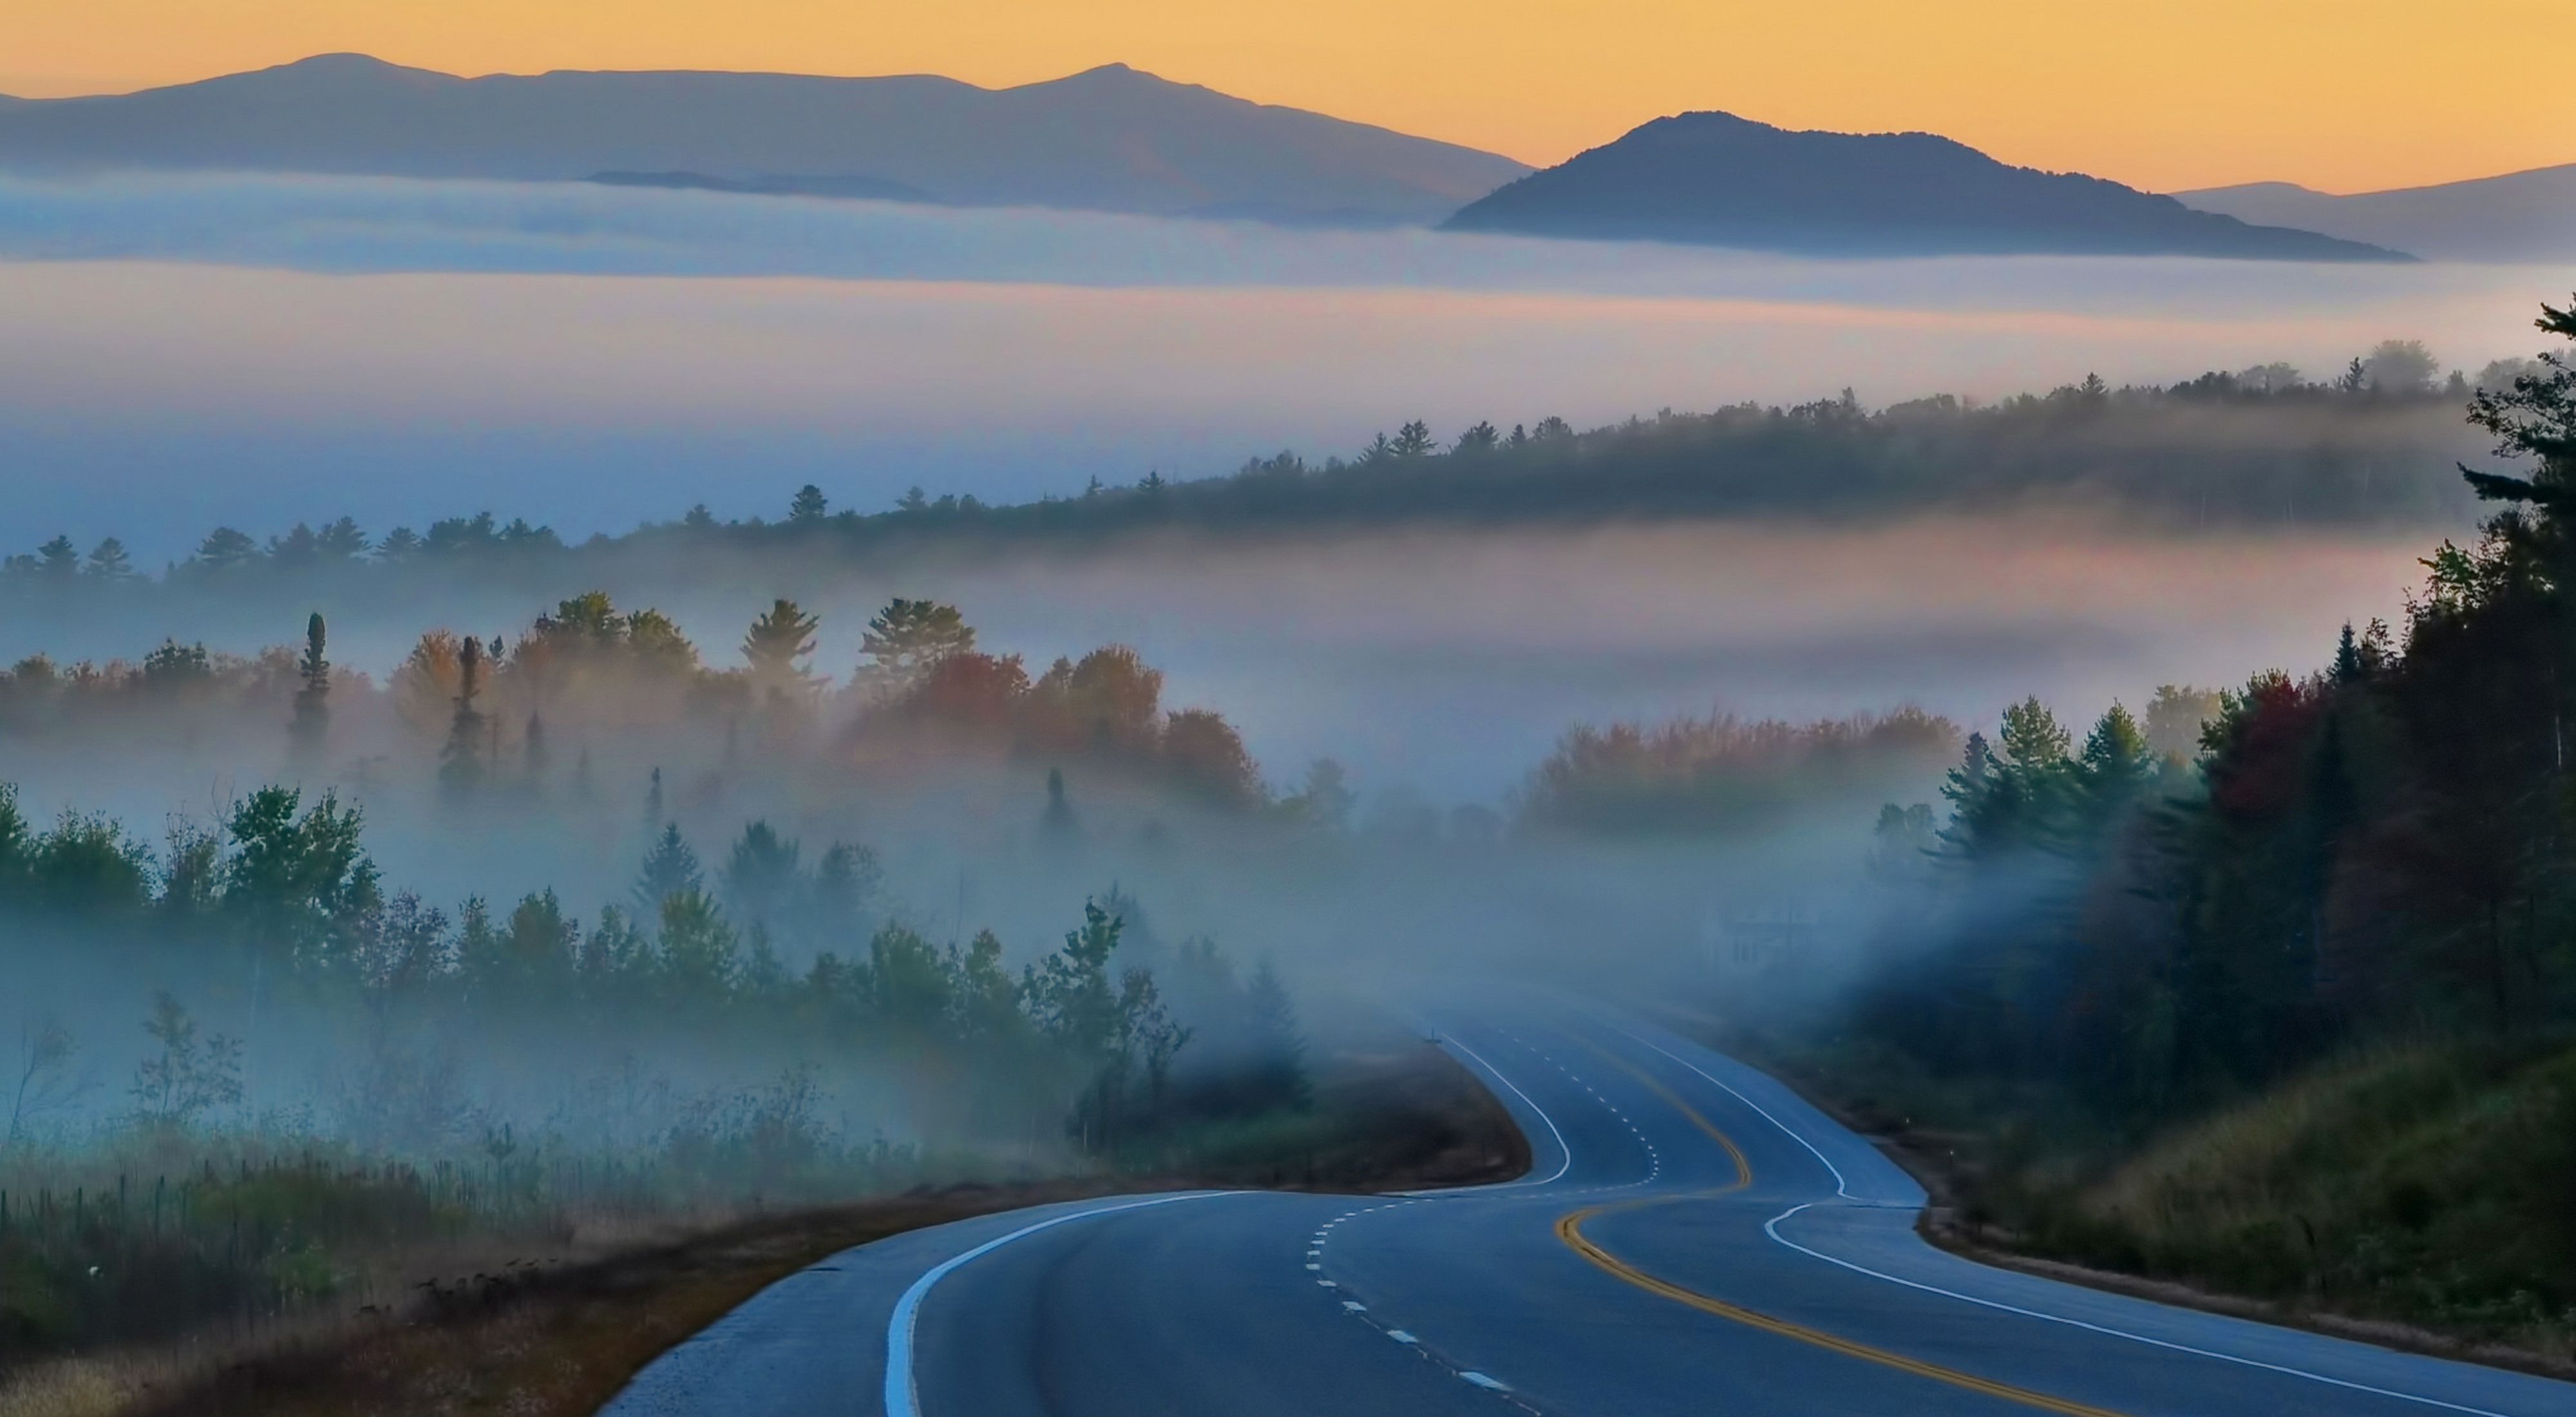 A highway winds through foggy, forested mountains.